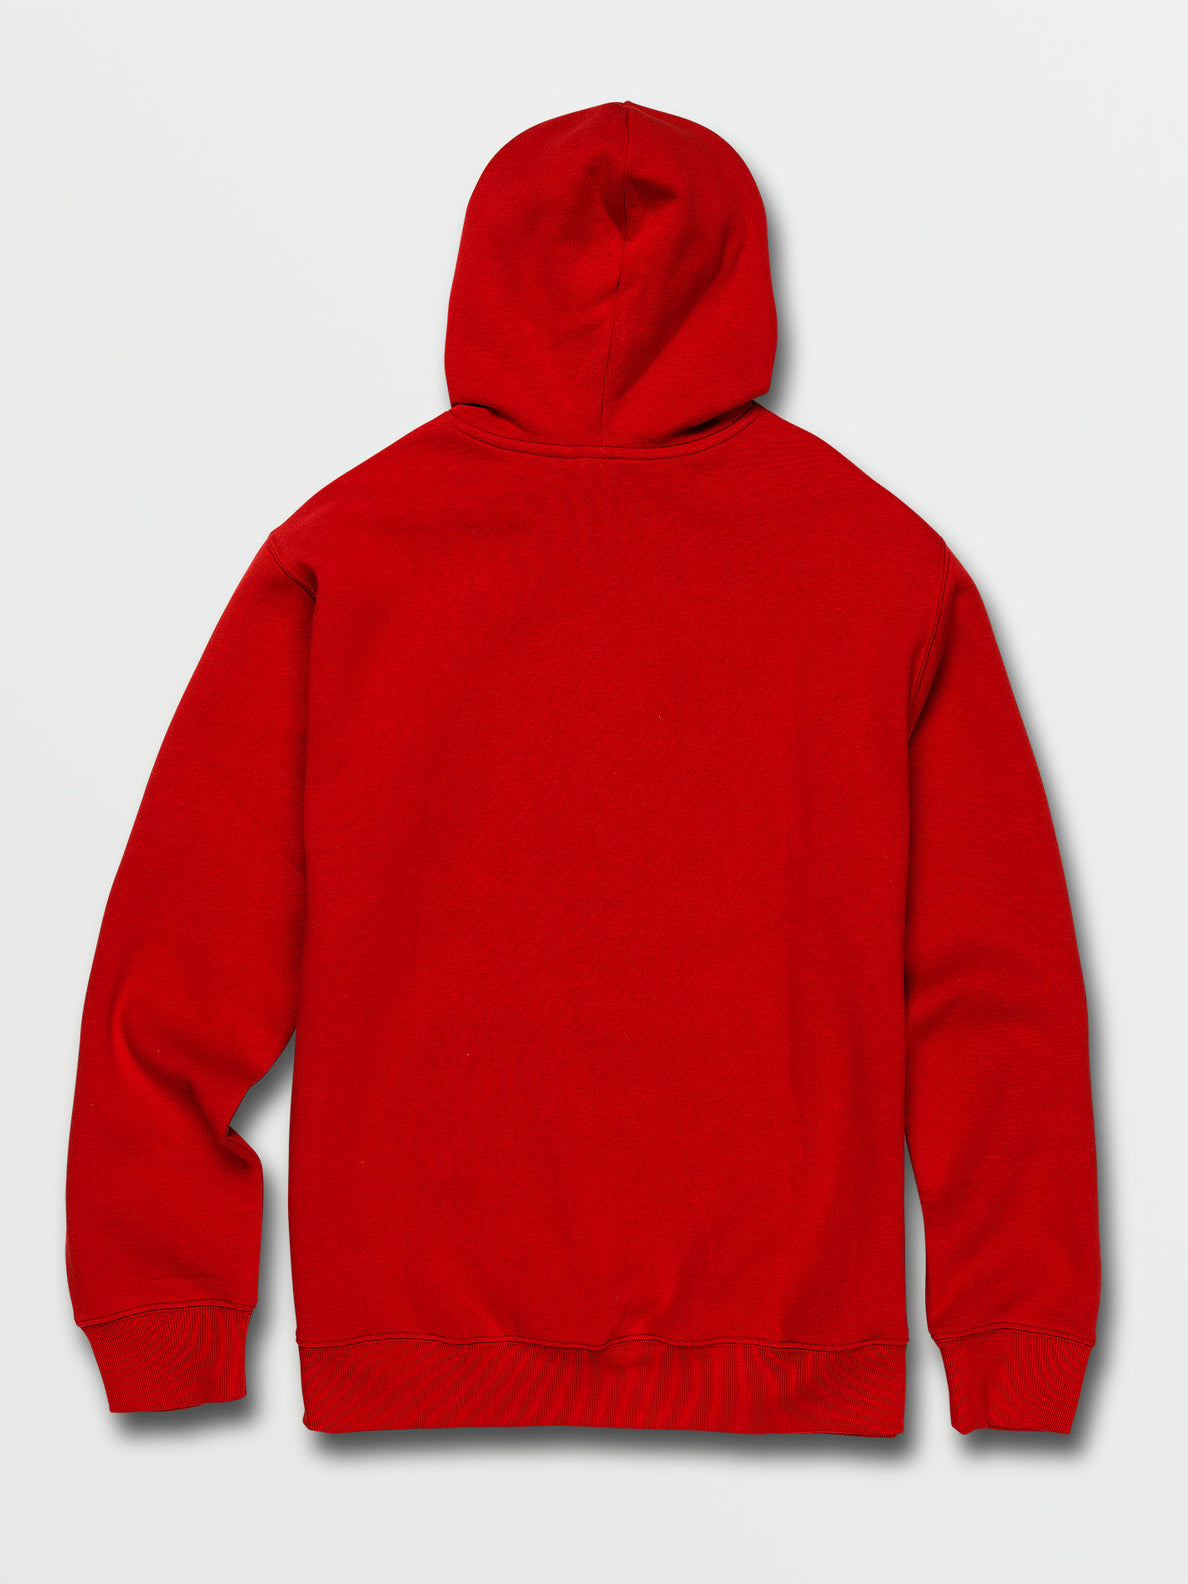 Catch 91 Pullover Hoodie - Ribbon Red (A4142105_RNR) [B]